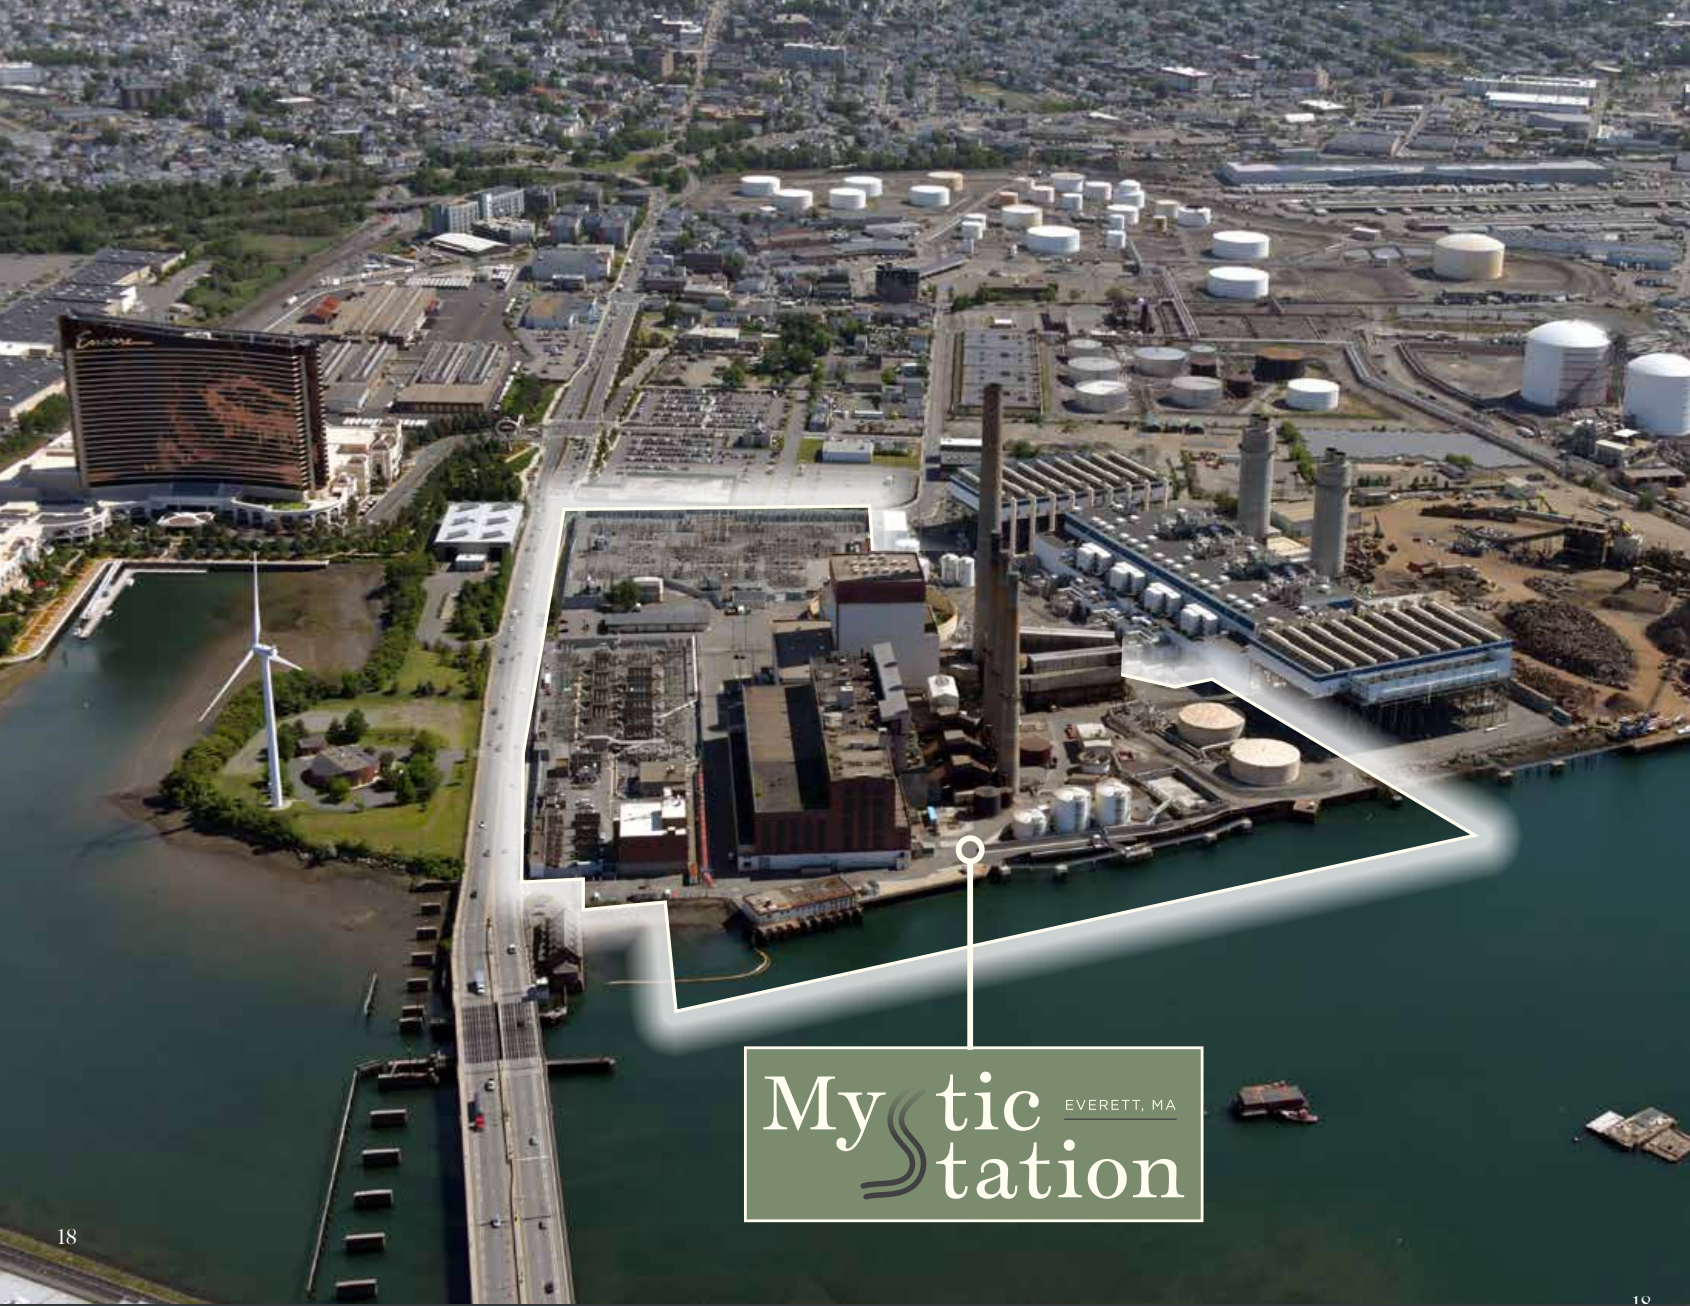 The location of Mystic Station. Wynn Resorts won the auction for a big section of the Mystic Generating Station on the banks of the Mystic River in Everett, across the street from the company’s Encore Boston Harbor casino.